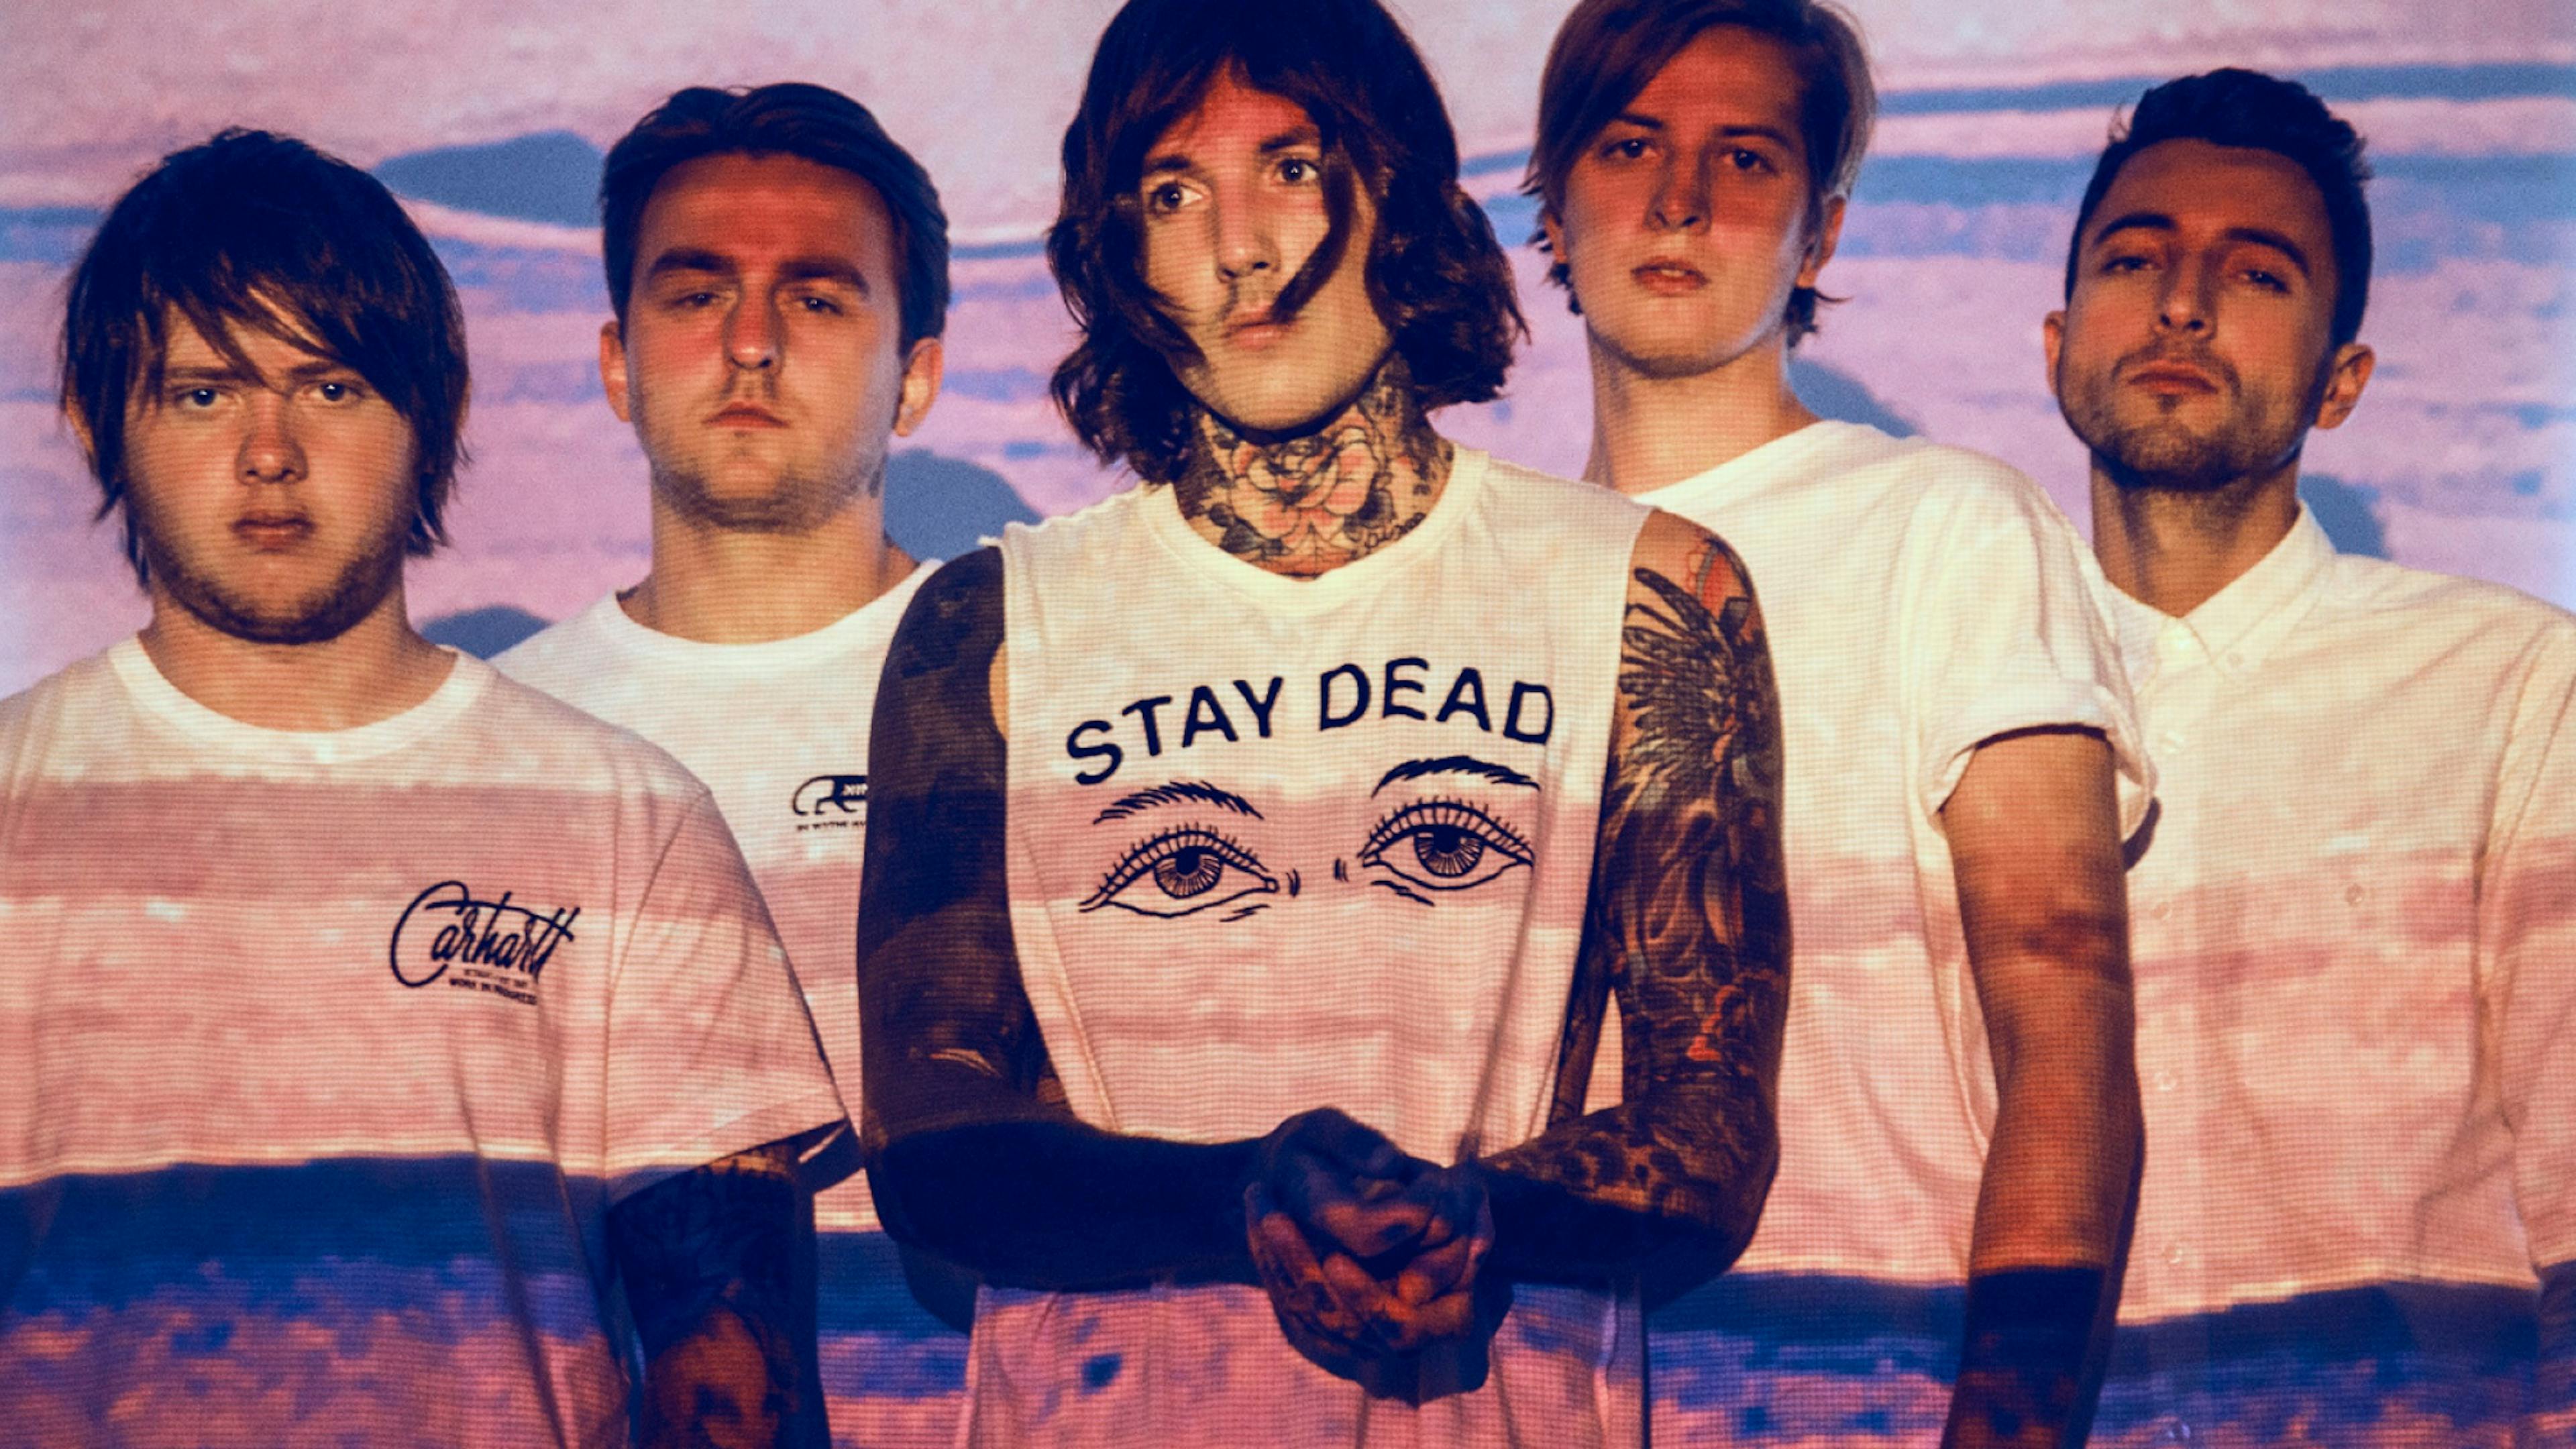 This Bring Me The Horizon banger has been certified Gold…